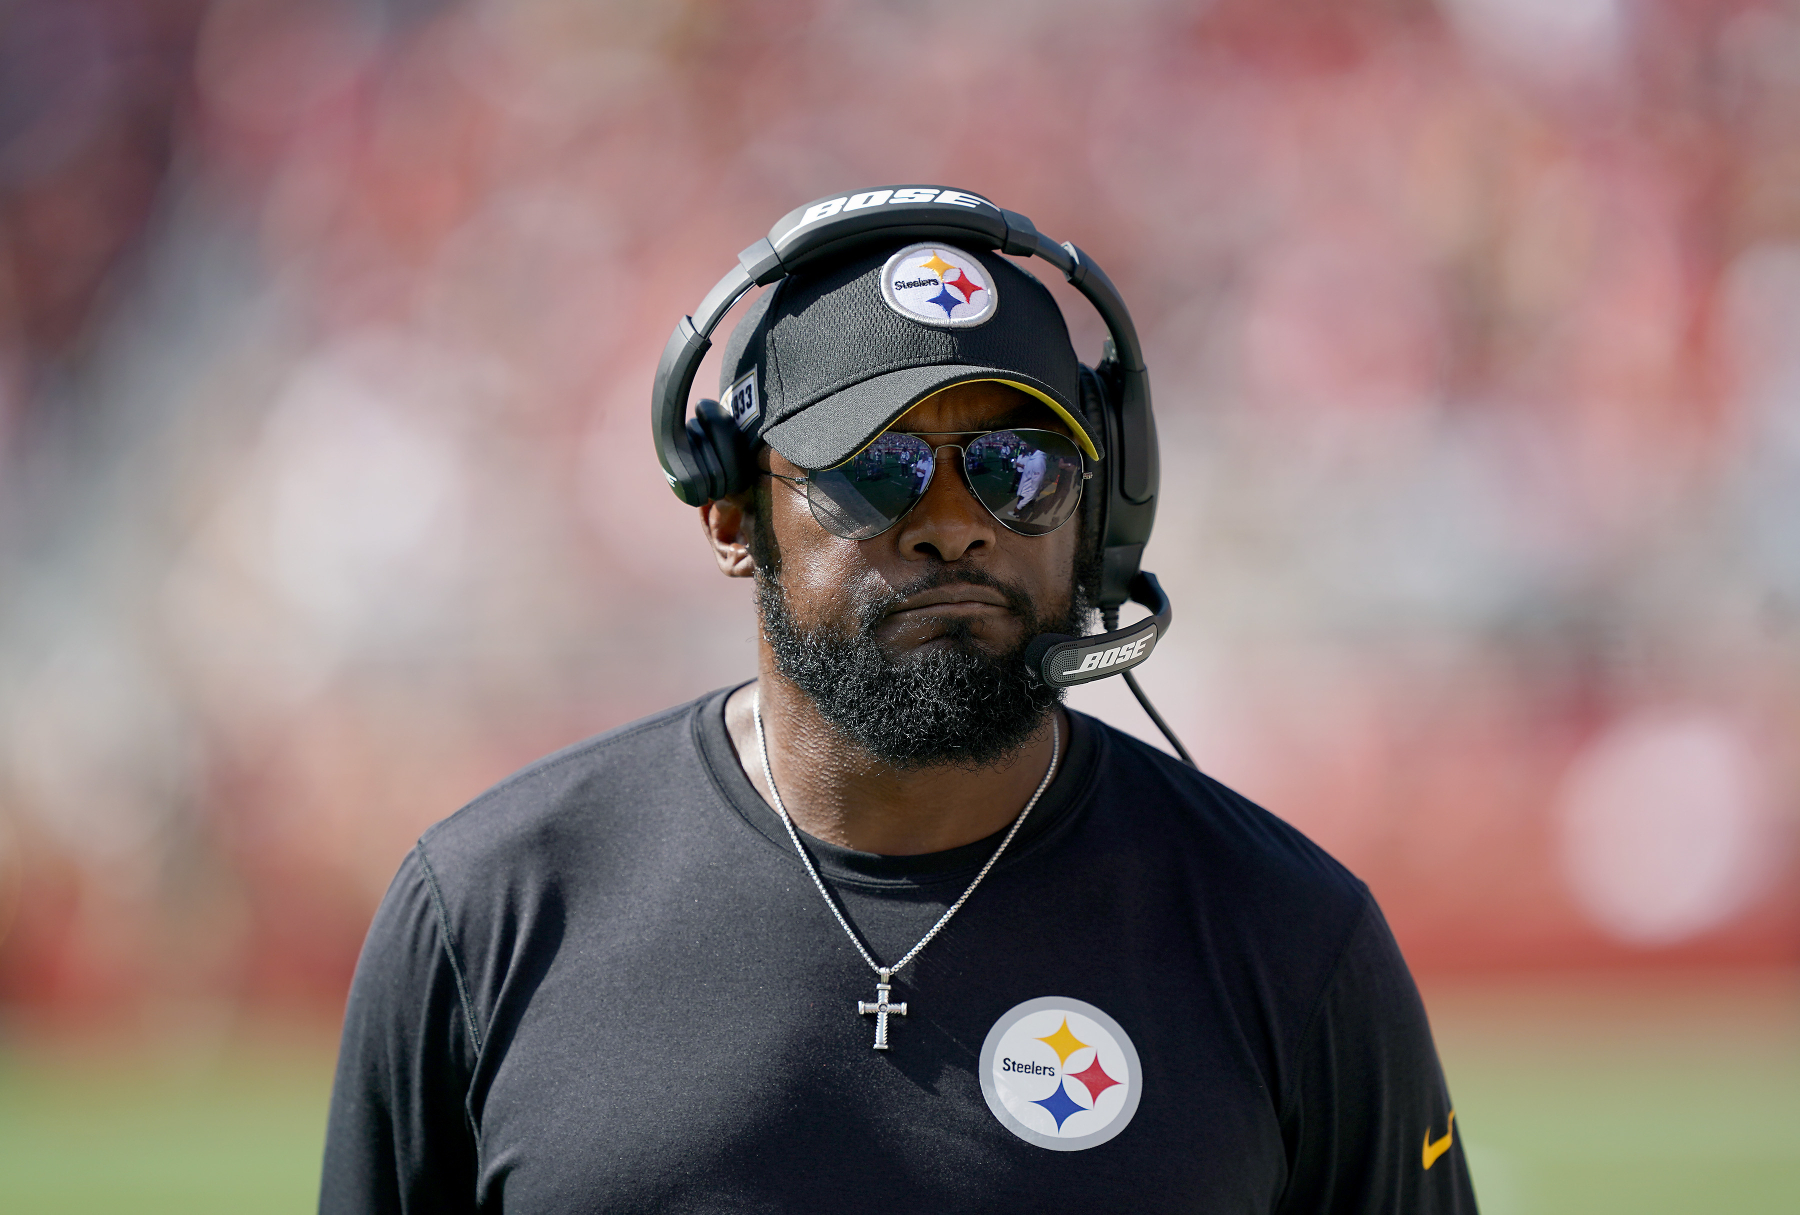 Mike Tomlin has become one of the best head coaches in the NFL with the Pittsburgh Steelers. Did Tomlin ever play in the NFL?